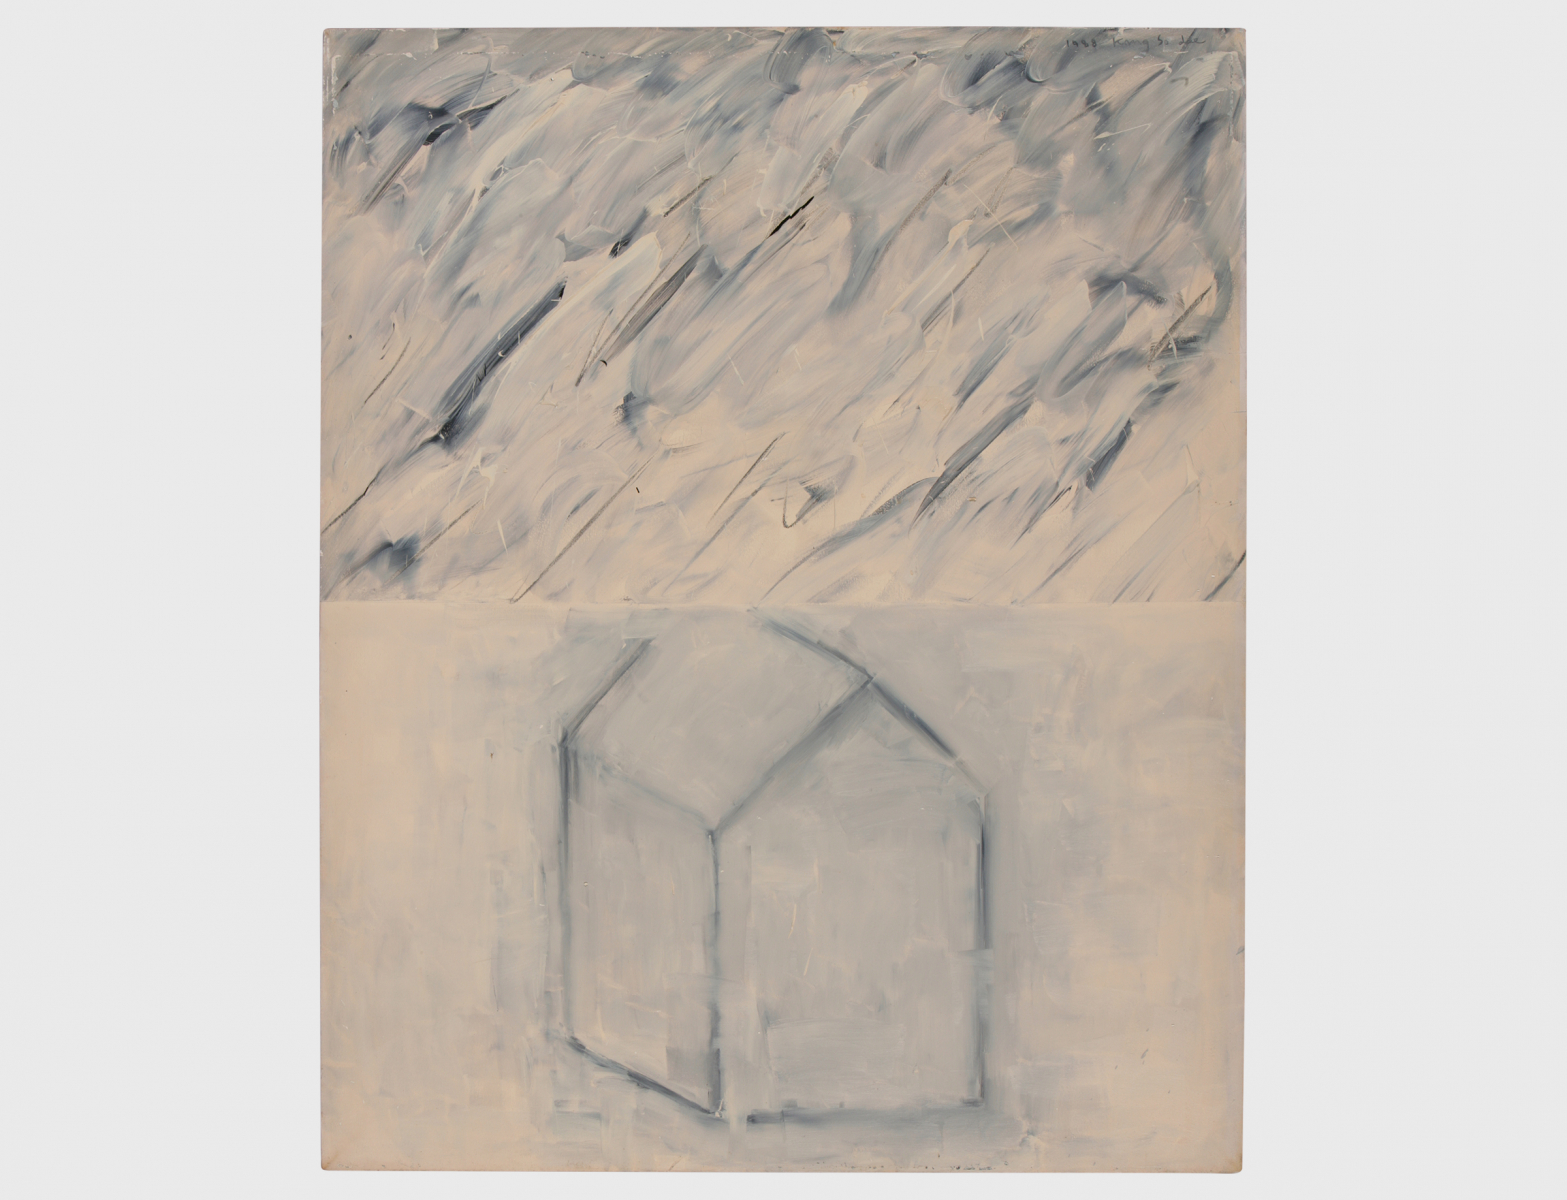 Untitled-88002, 1988, Oil on Canvas, 132.3x162.6cm